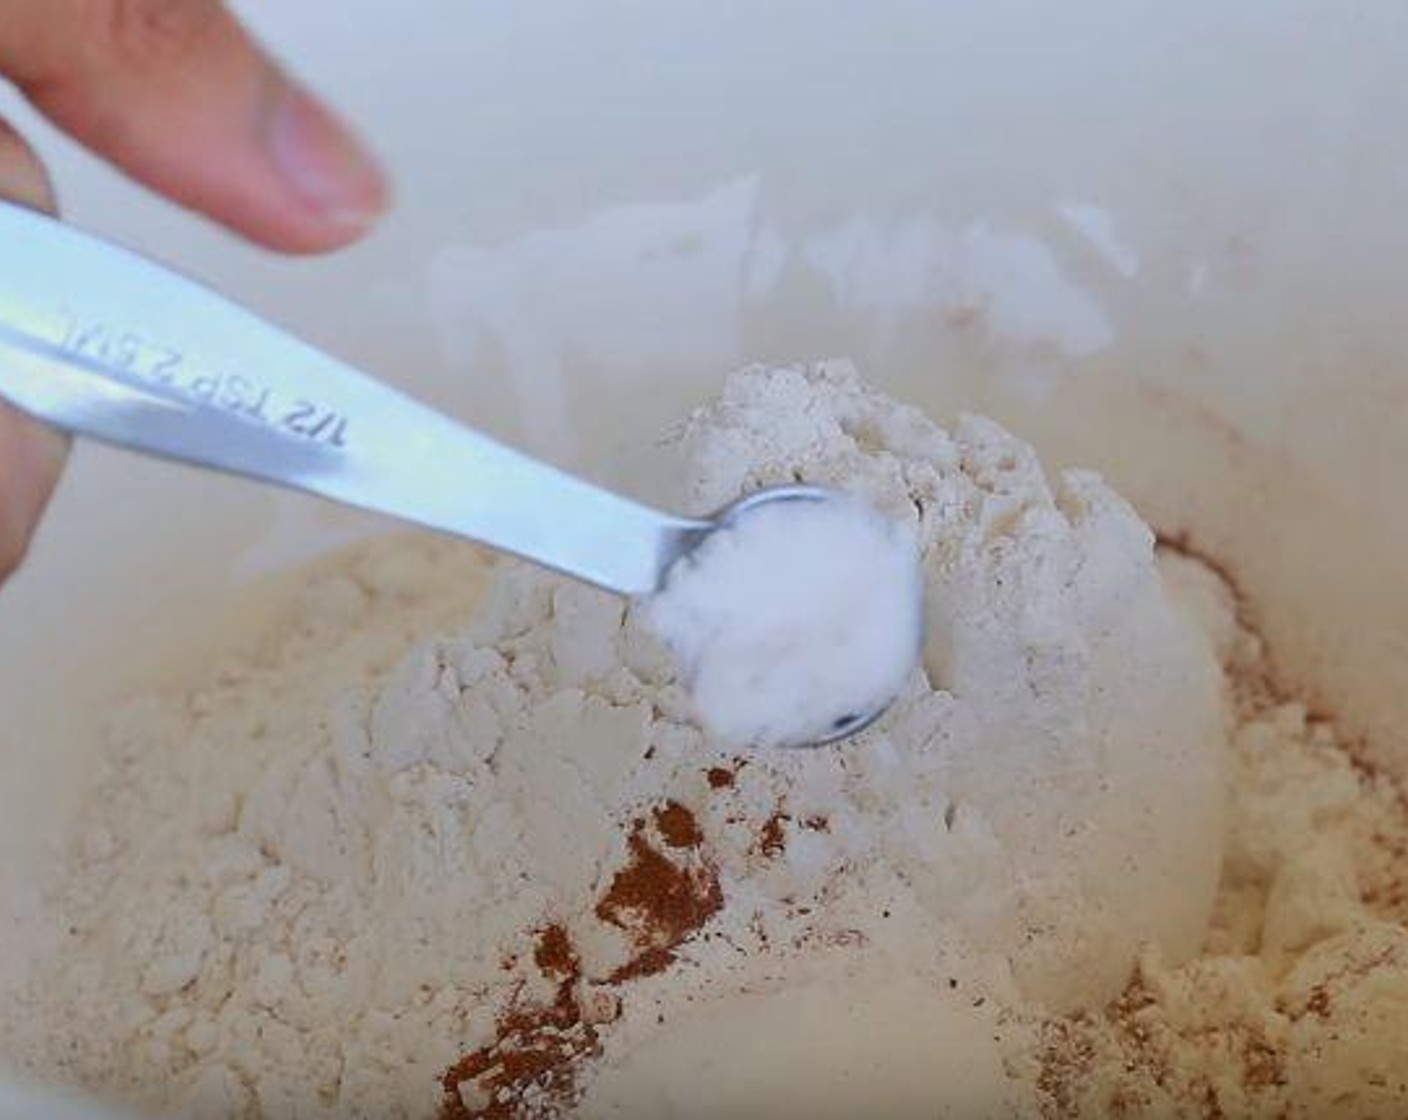 step 1 In a large mixing bowl whisk together All-Purpose Flour (2 cups), Pumpkin Pie Spice (1/2 Tbsp), Baking Powder (1/2 Tbsp), Baking Soda (1 tsp), Salt (1/2 tsp) and Brown Sugar (1/3 cup)